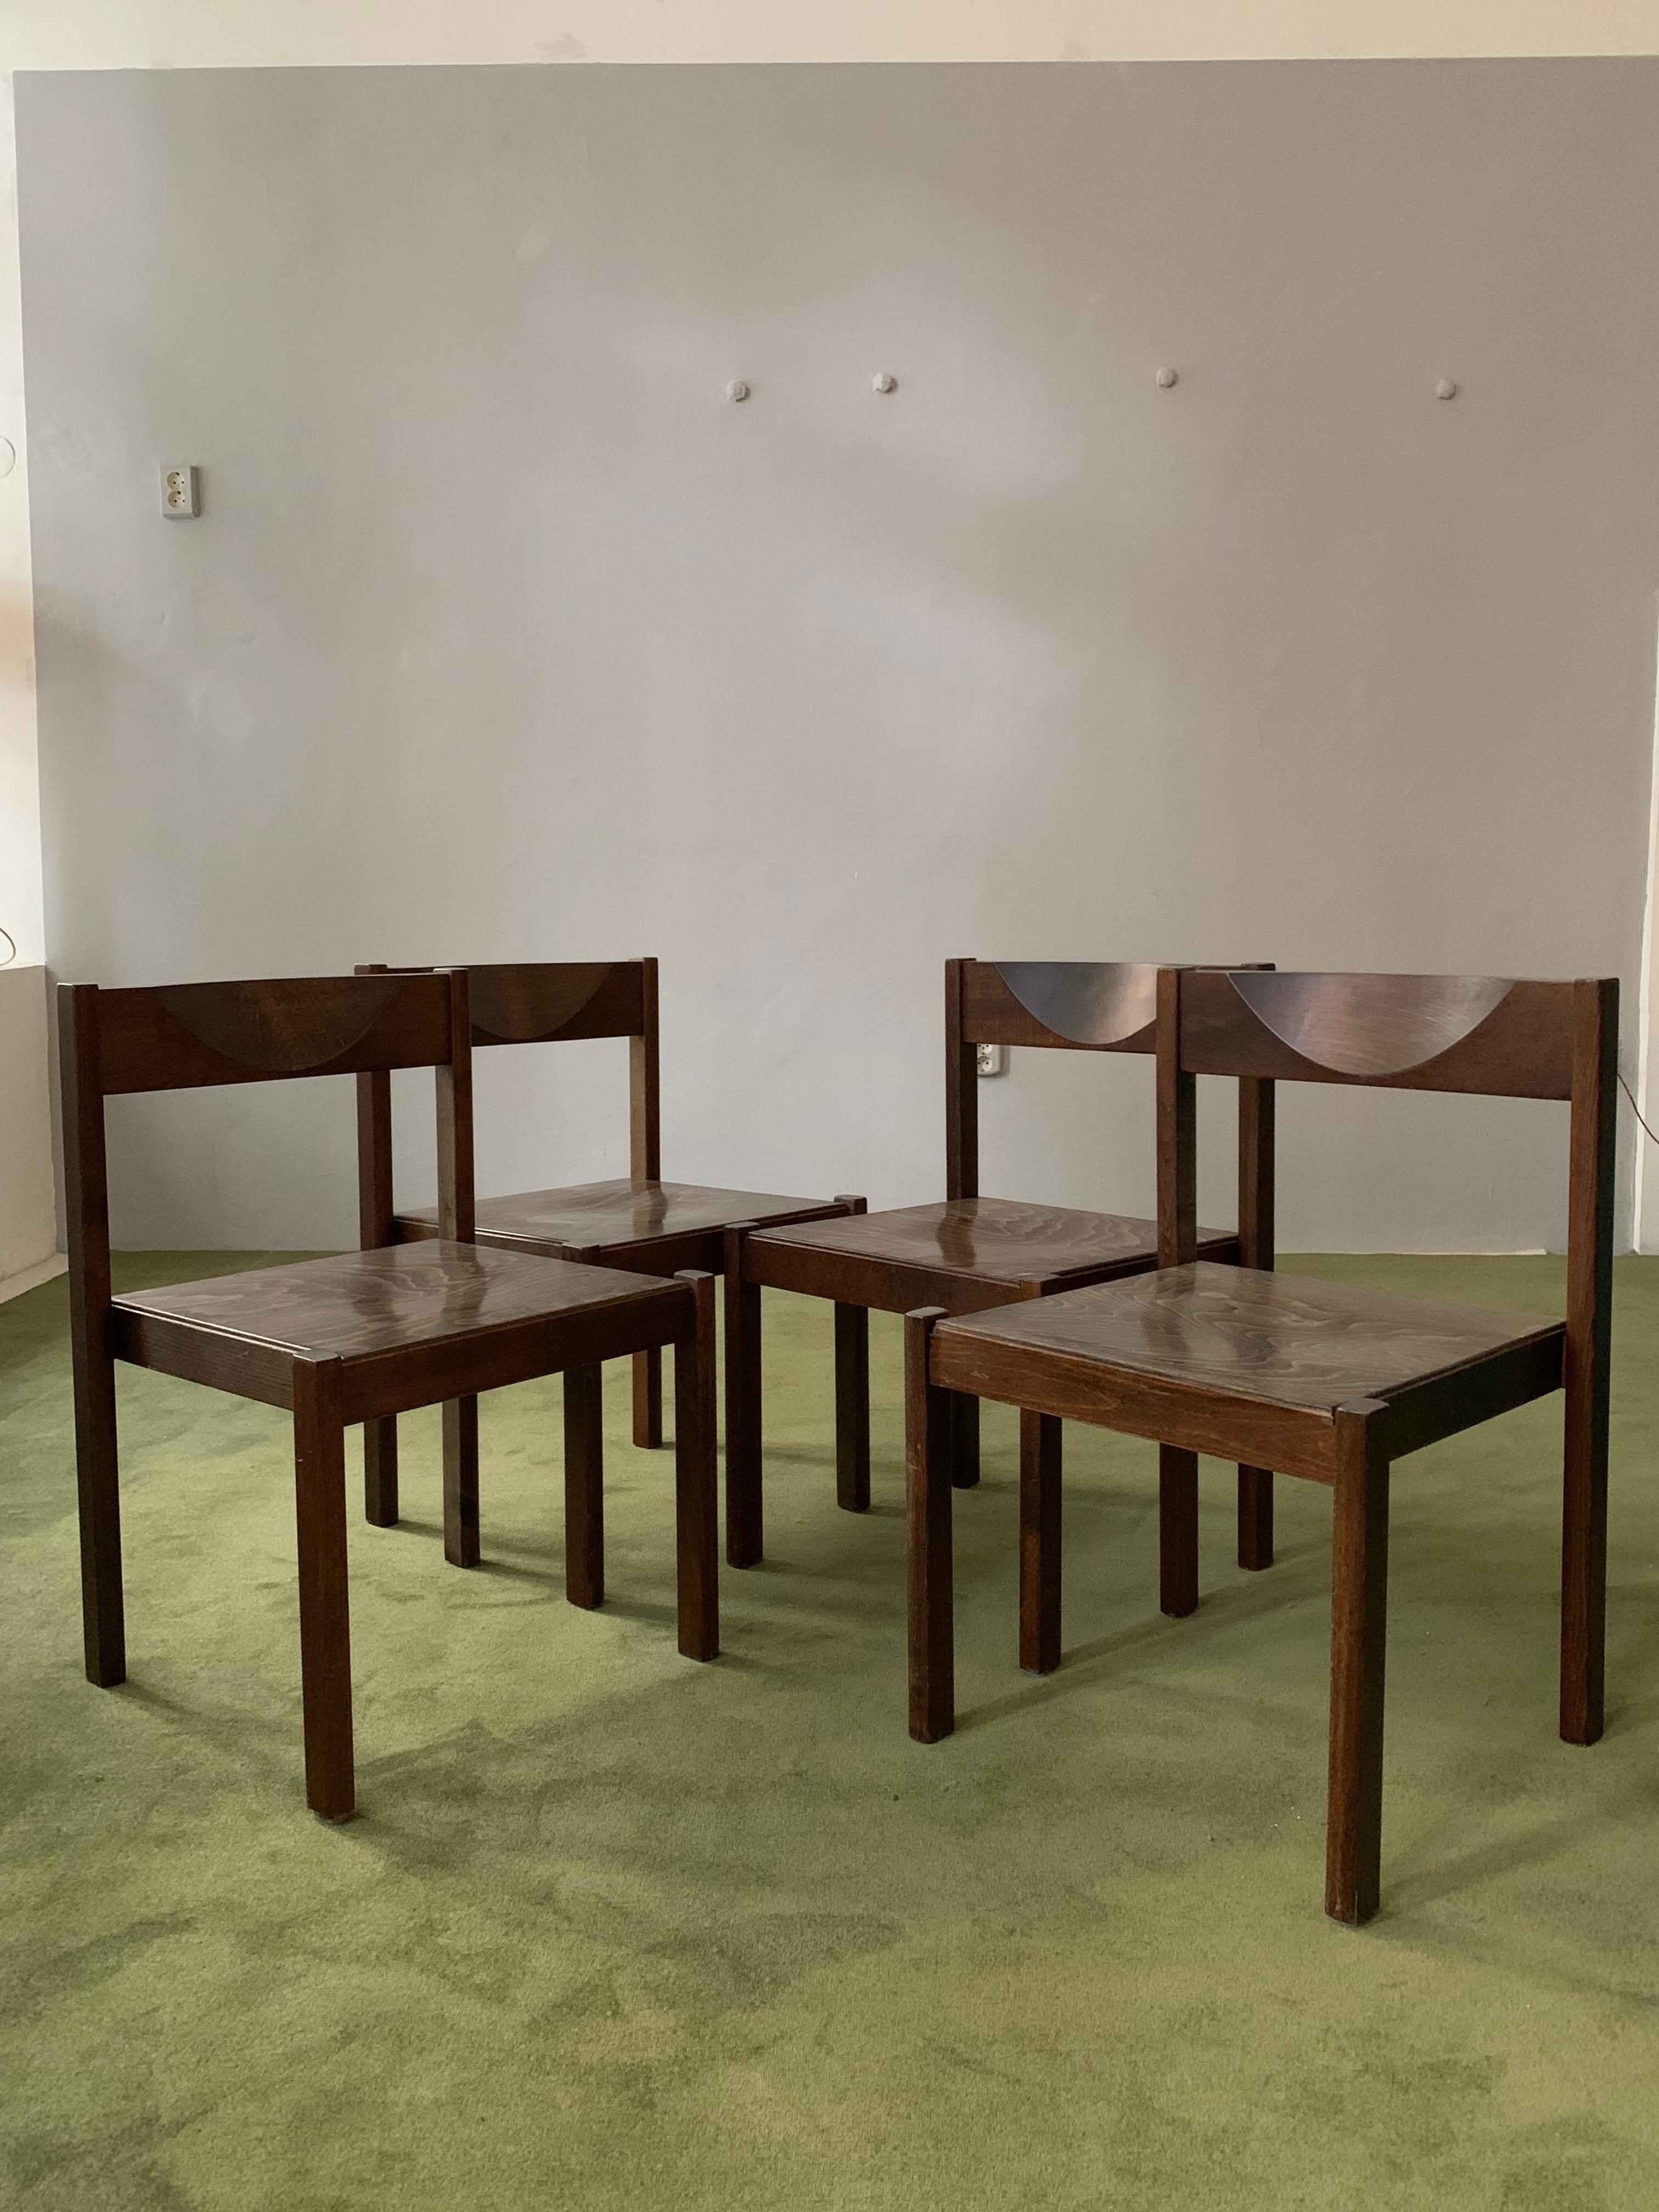  Set of 4 Santo Chairs by Edlef Bandixen for Dietiker Switzerland 1969  For Sale 8